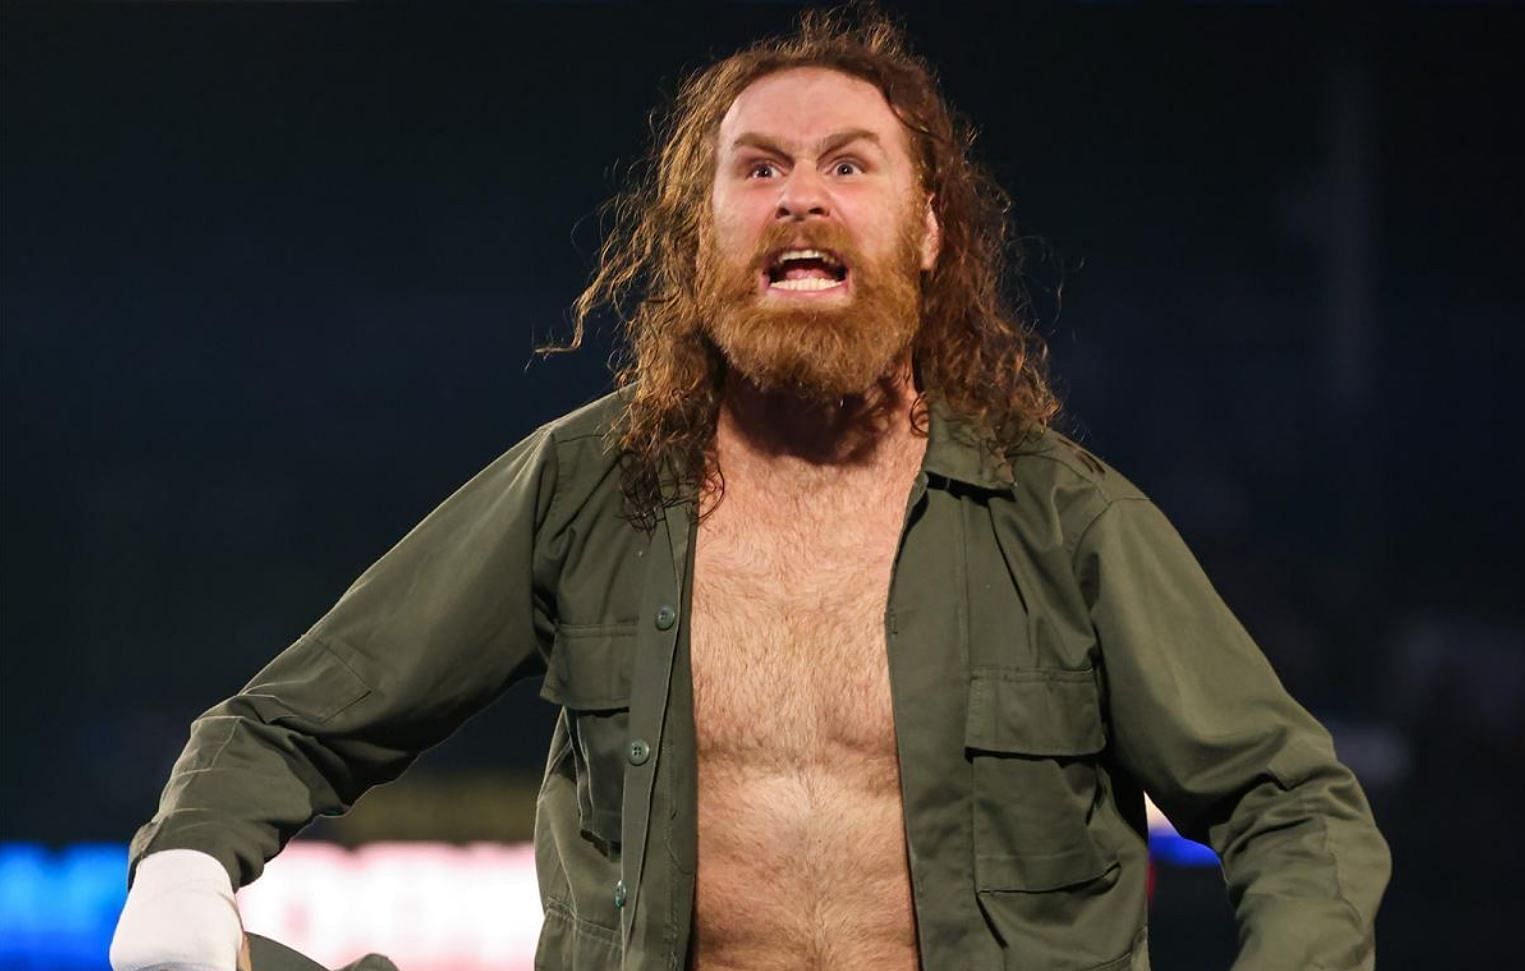 Sami Zayn was in the main event of SmackDown this week